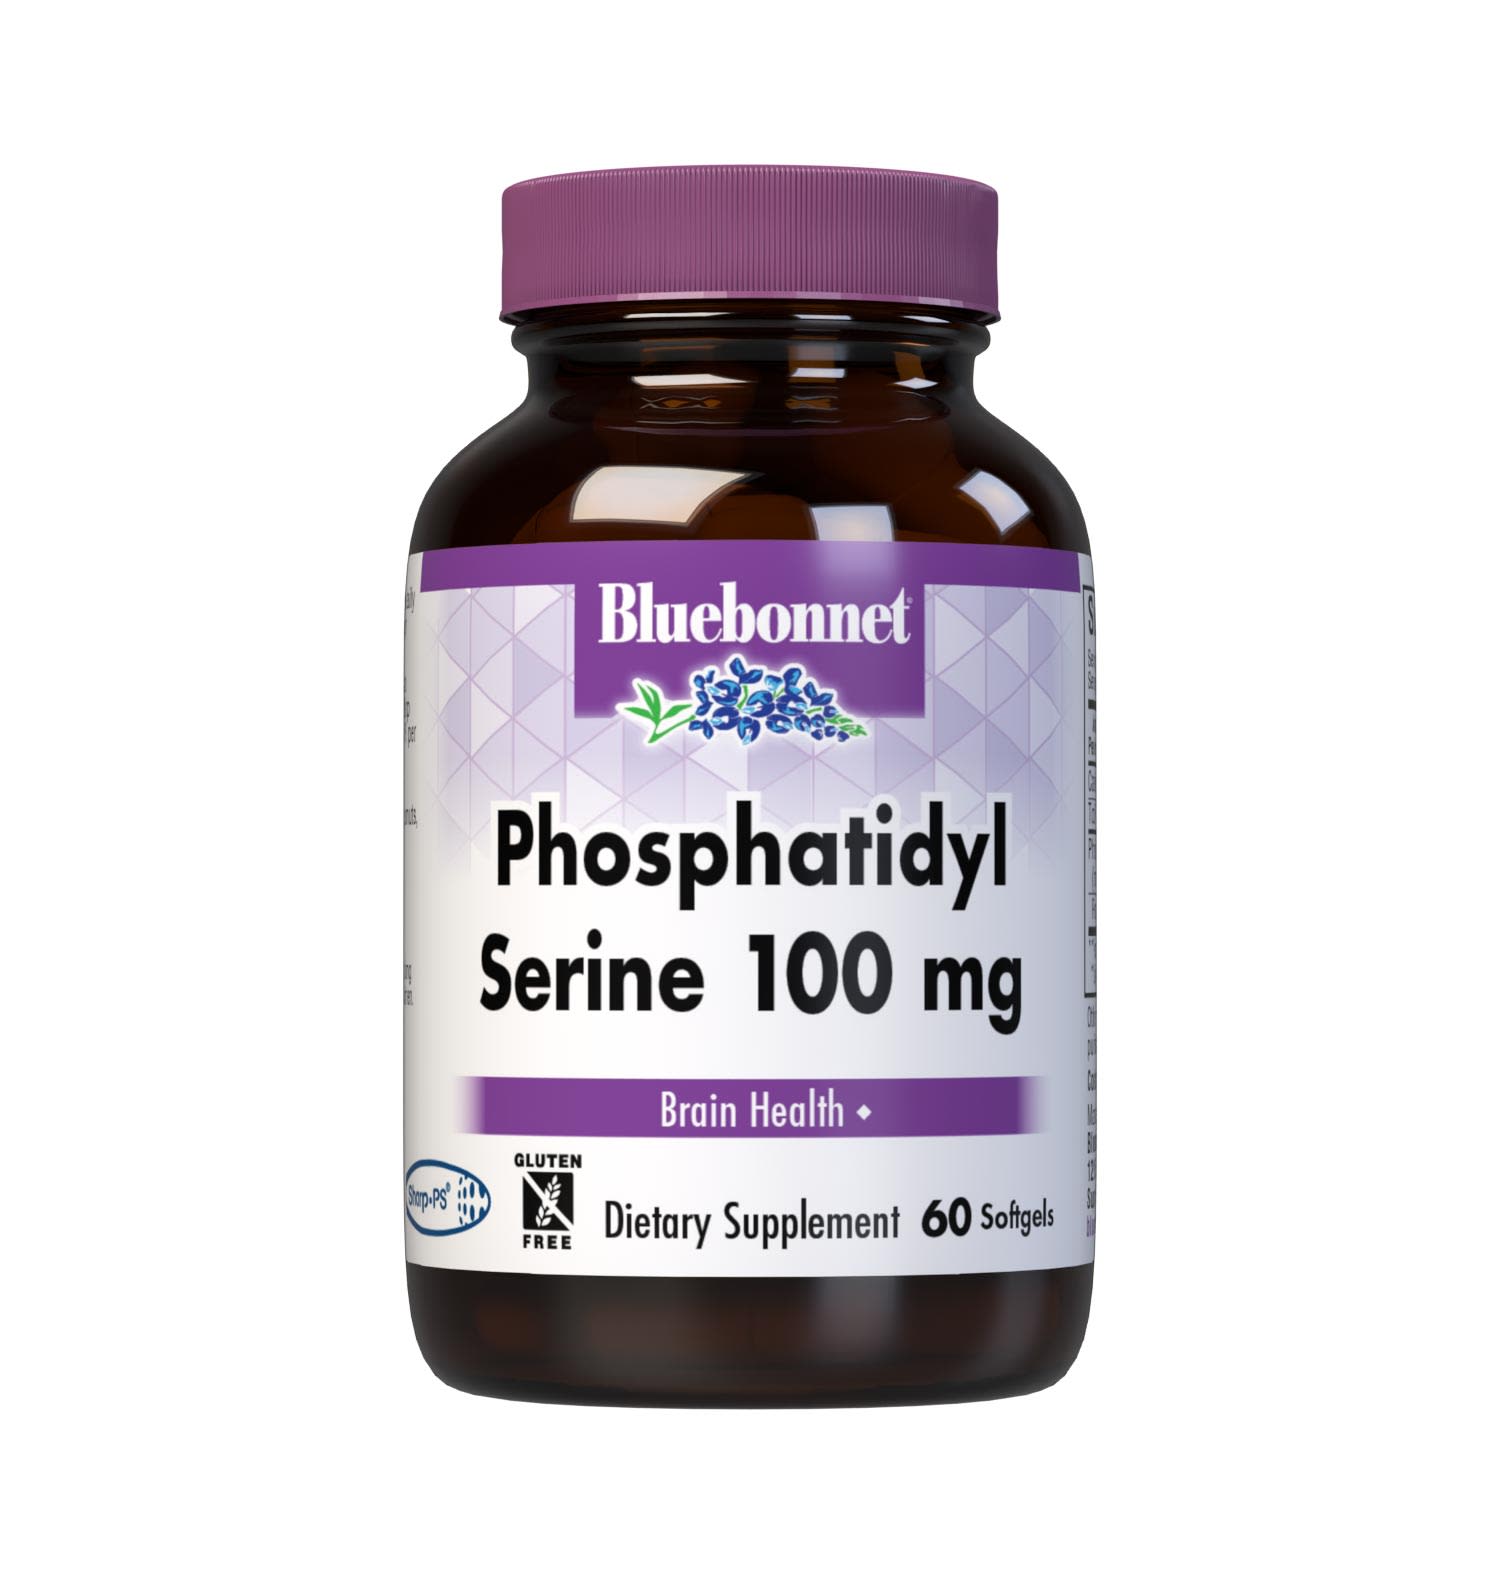 Bluebonnet’s Phosphatidylserine 100 mg 60 Softgels are formulated with patented phosphatidylserine (PS), Sharp PS derived from soybeans that delivers 100 mg of PS per serving to support brain health, memory and cognitive function. #size_60 count